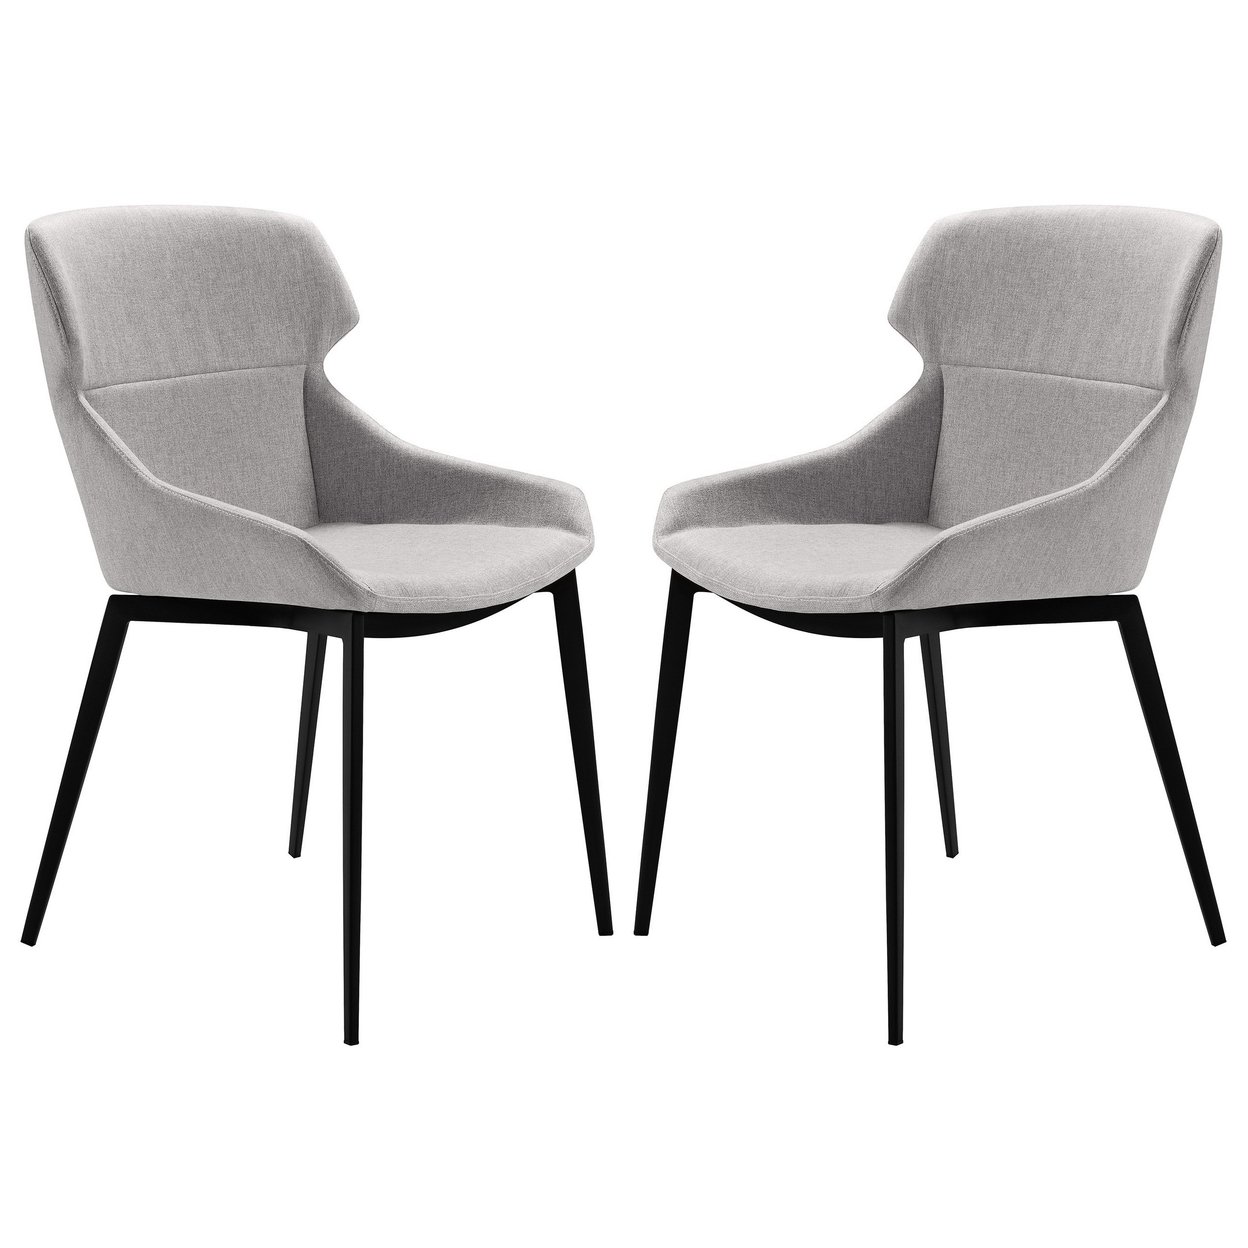 Wing Back Fabric Dining Chair With Curved Seat, Set Of 2, Light Gray- Saltoro Sherpi